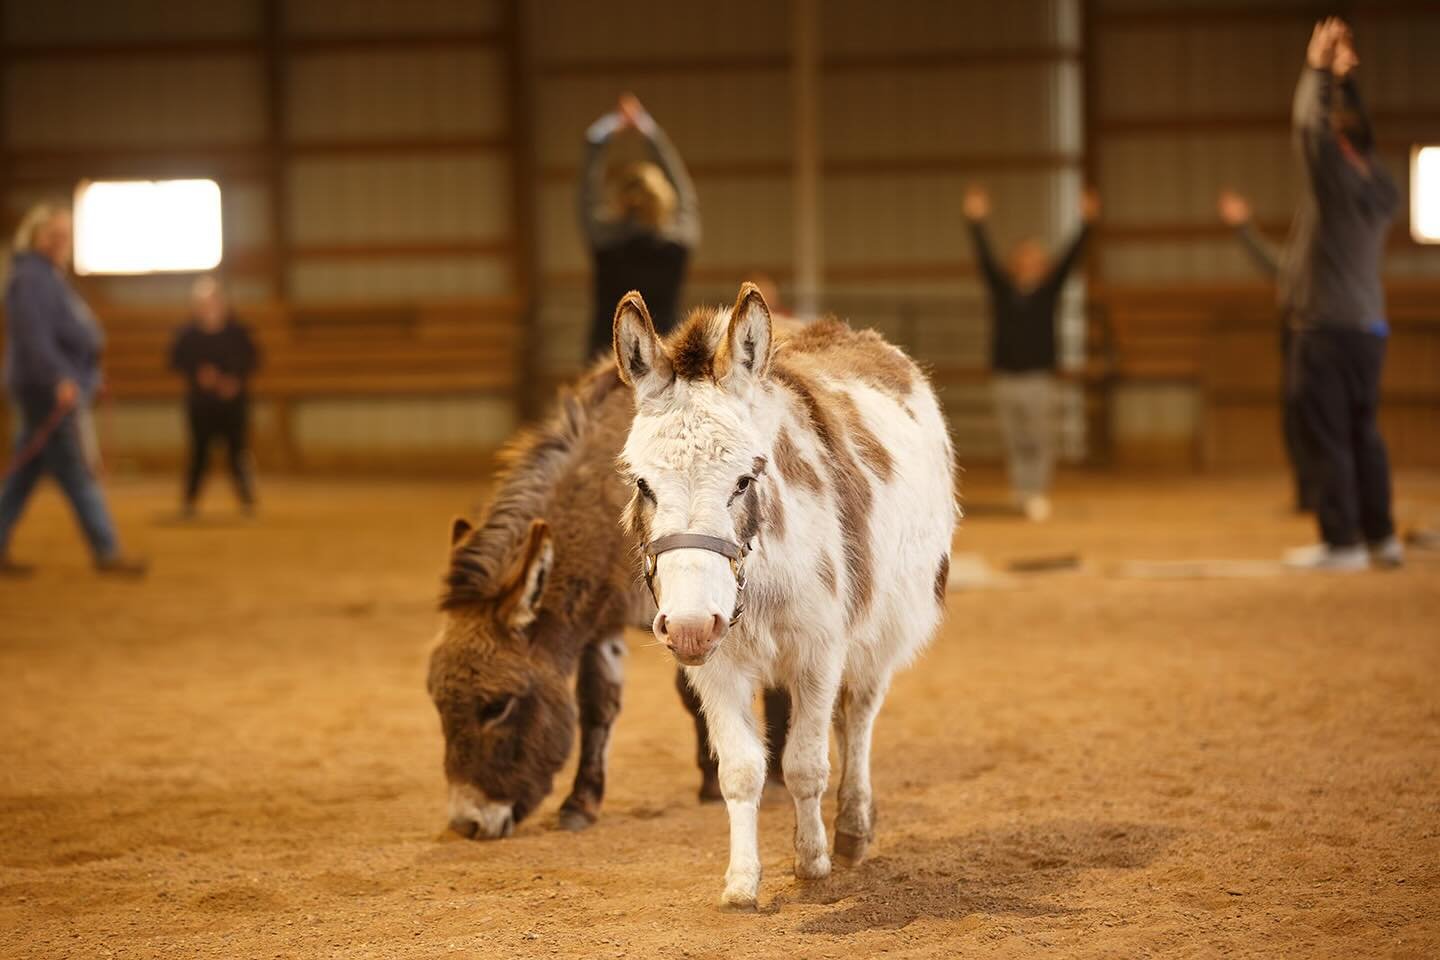 Happy Donkey Day to these two cuties an all the hard working donkeys around the 🌎. Meet these two in person at mini horse yoga! 🫏